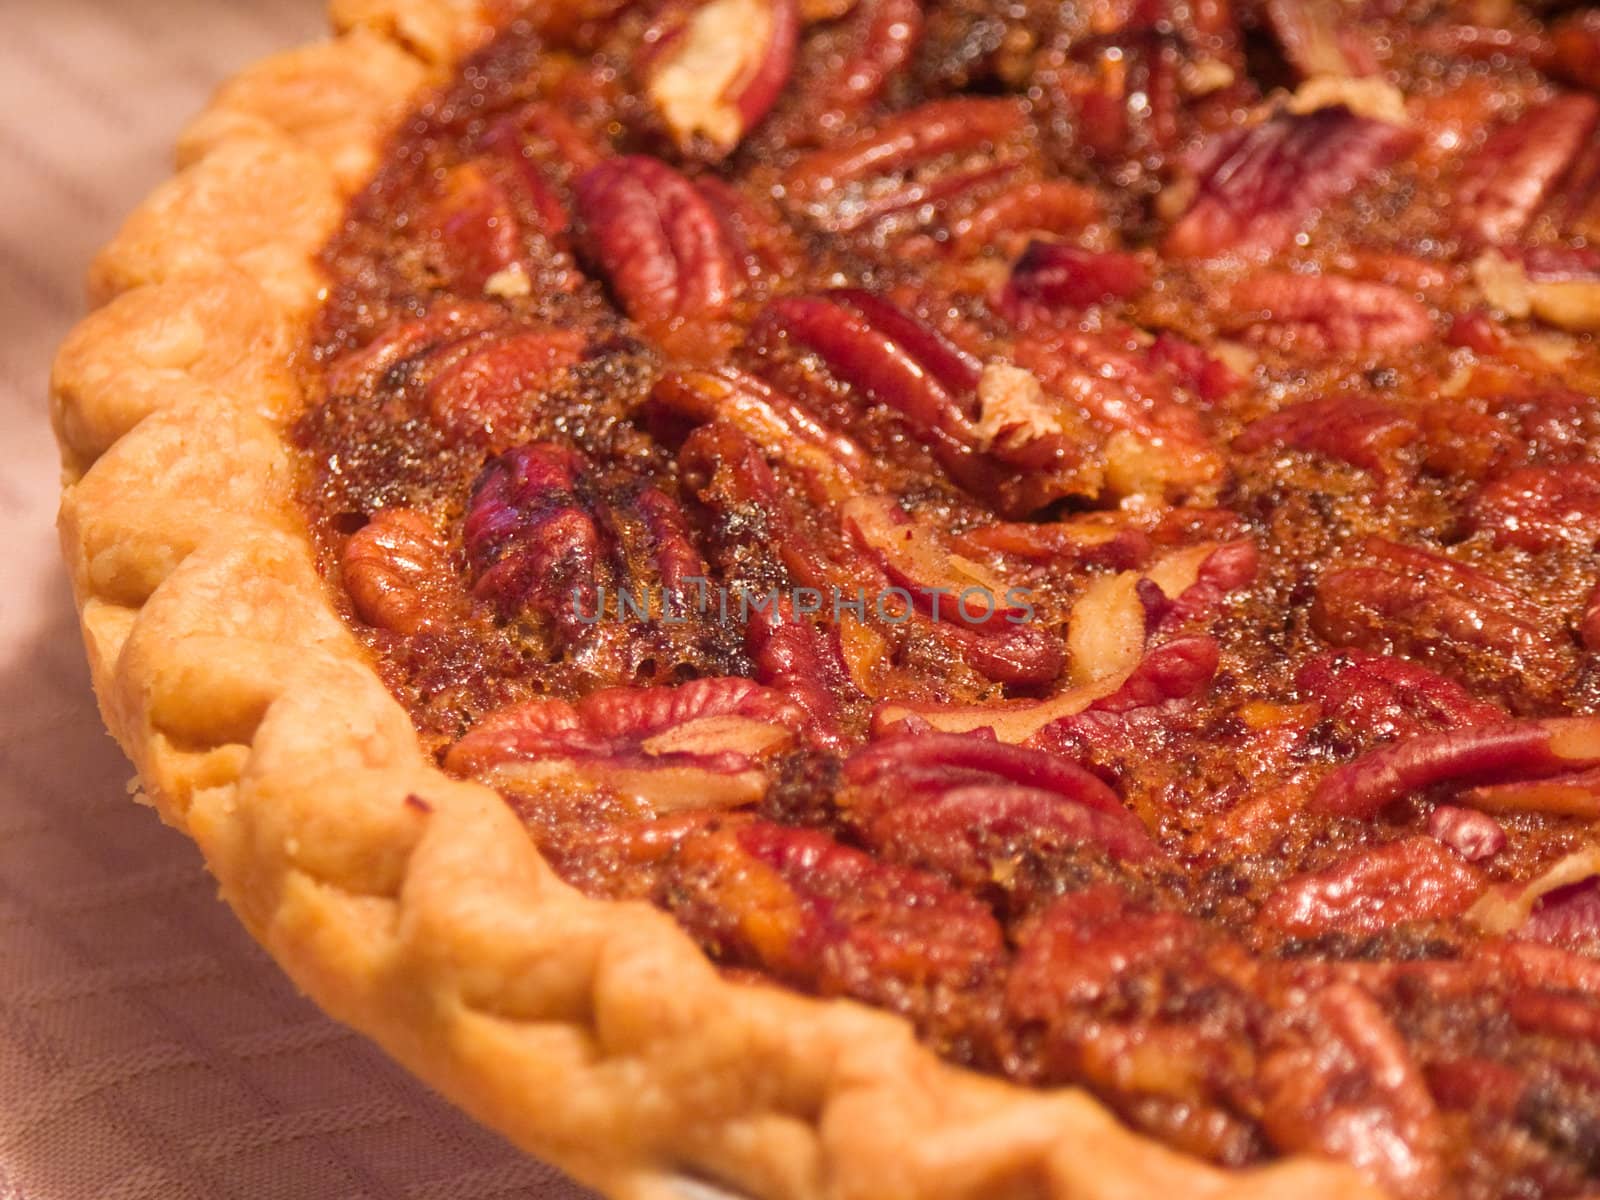 Yummy Pecan Pie fresh from the oven, closeup